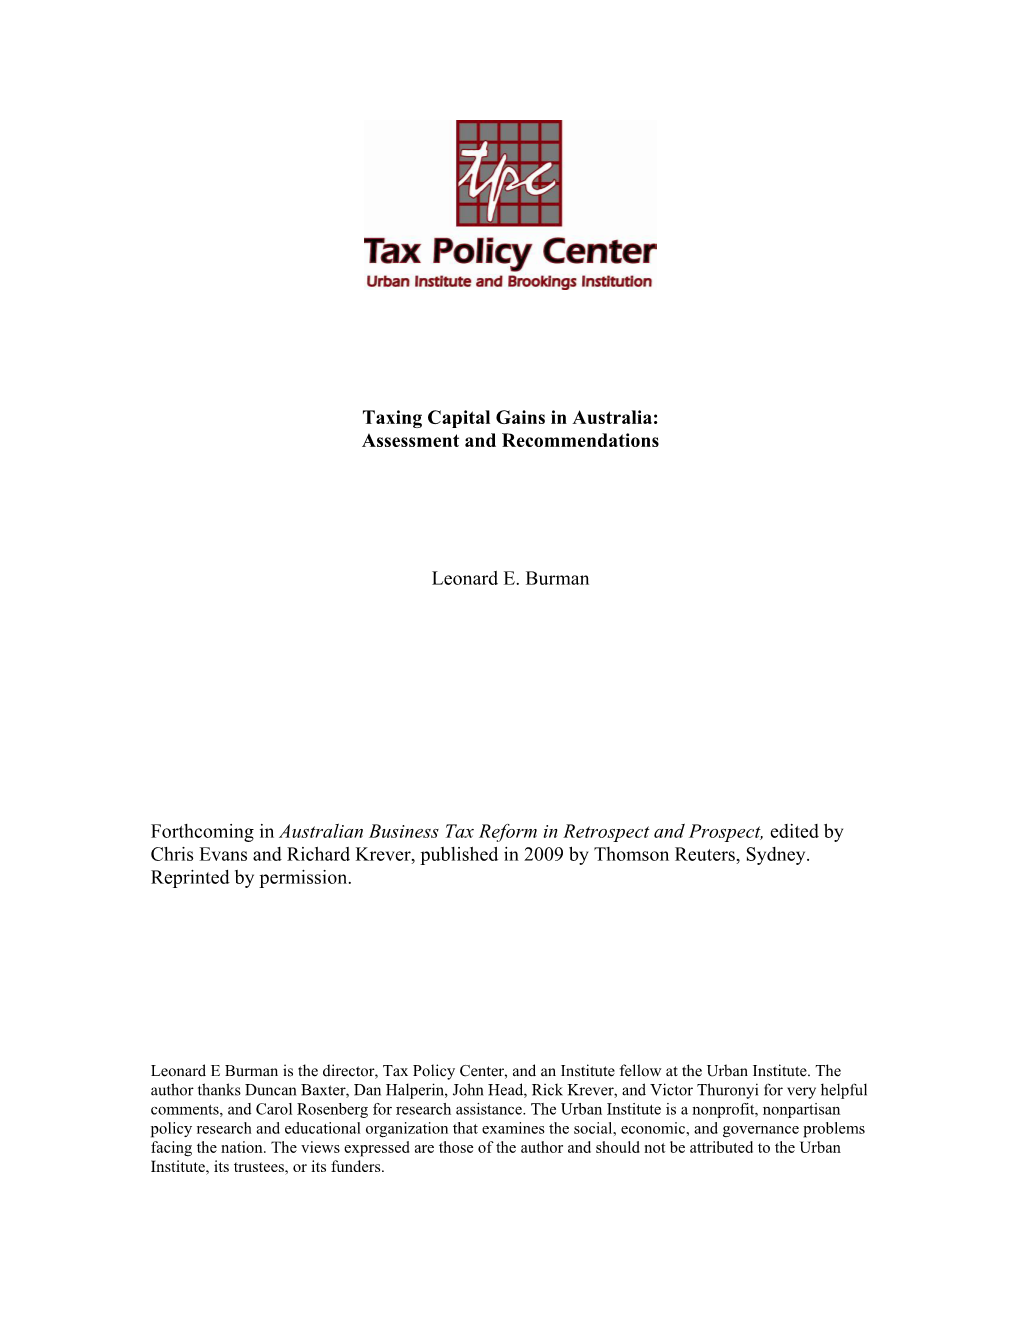 Taxing Capital Gains in Australia: Assessment and Recommendations